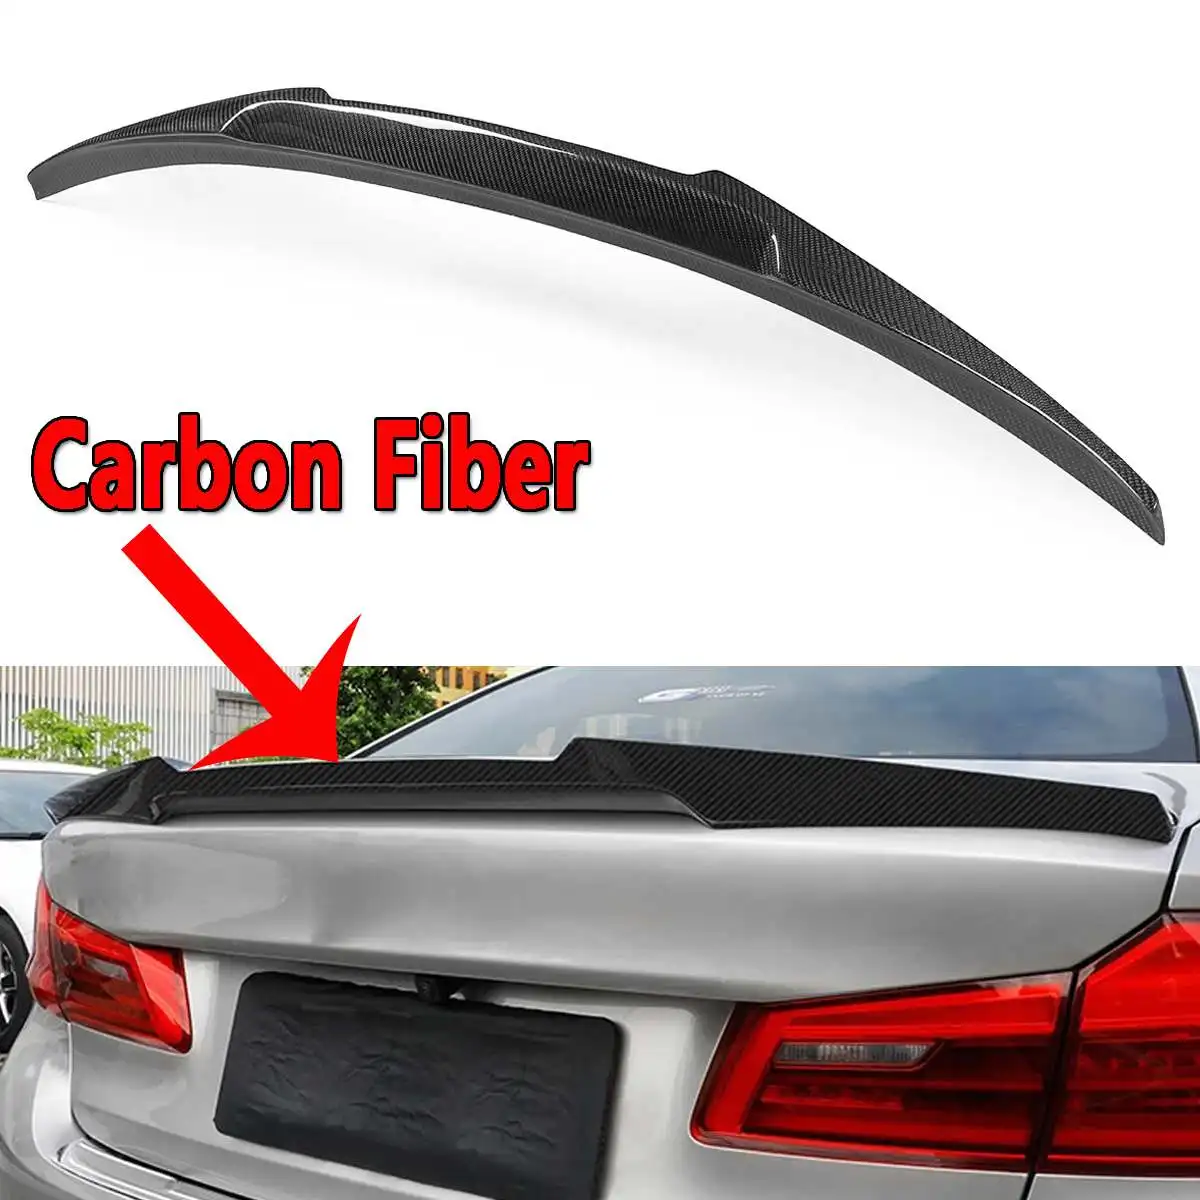 

New Rear Trunk Boot Spoiler Wings Real Carbon Fiber Trunk Spoiler Lid For 2017-18 for BMW G30 520d 530i 540i V Type Car-styling